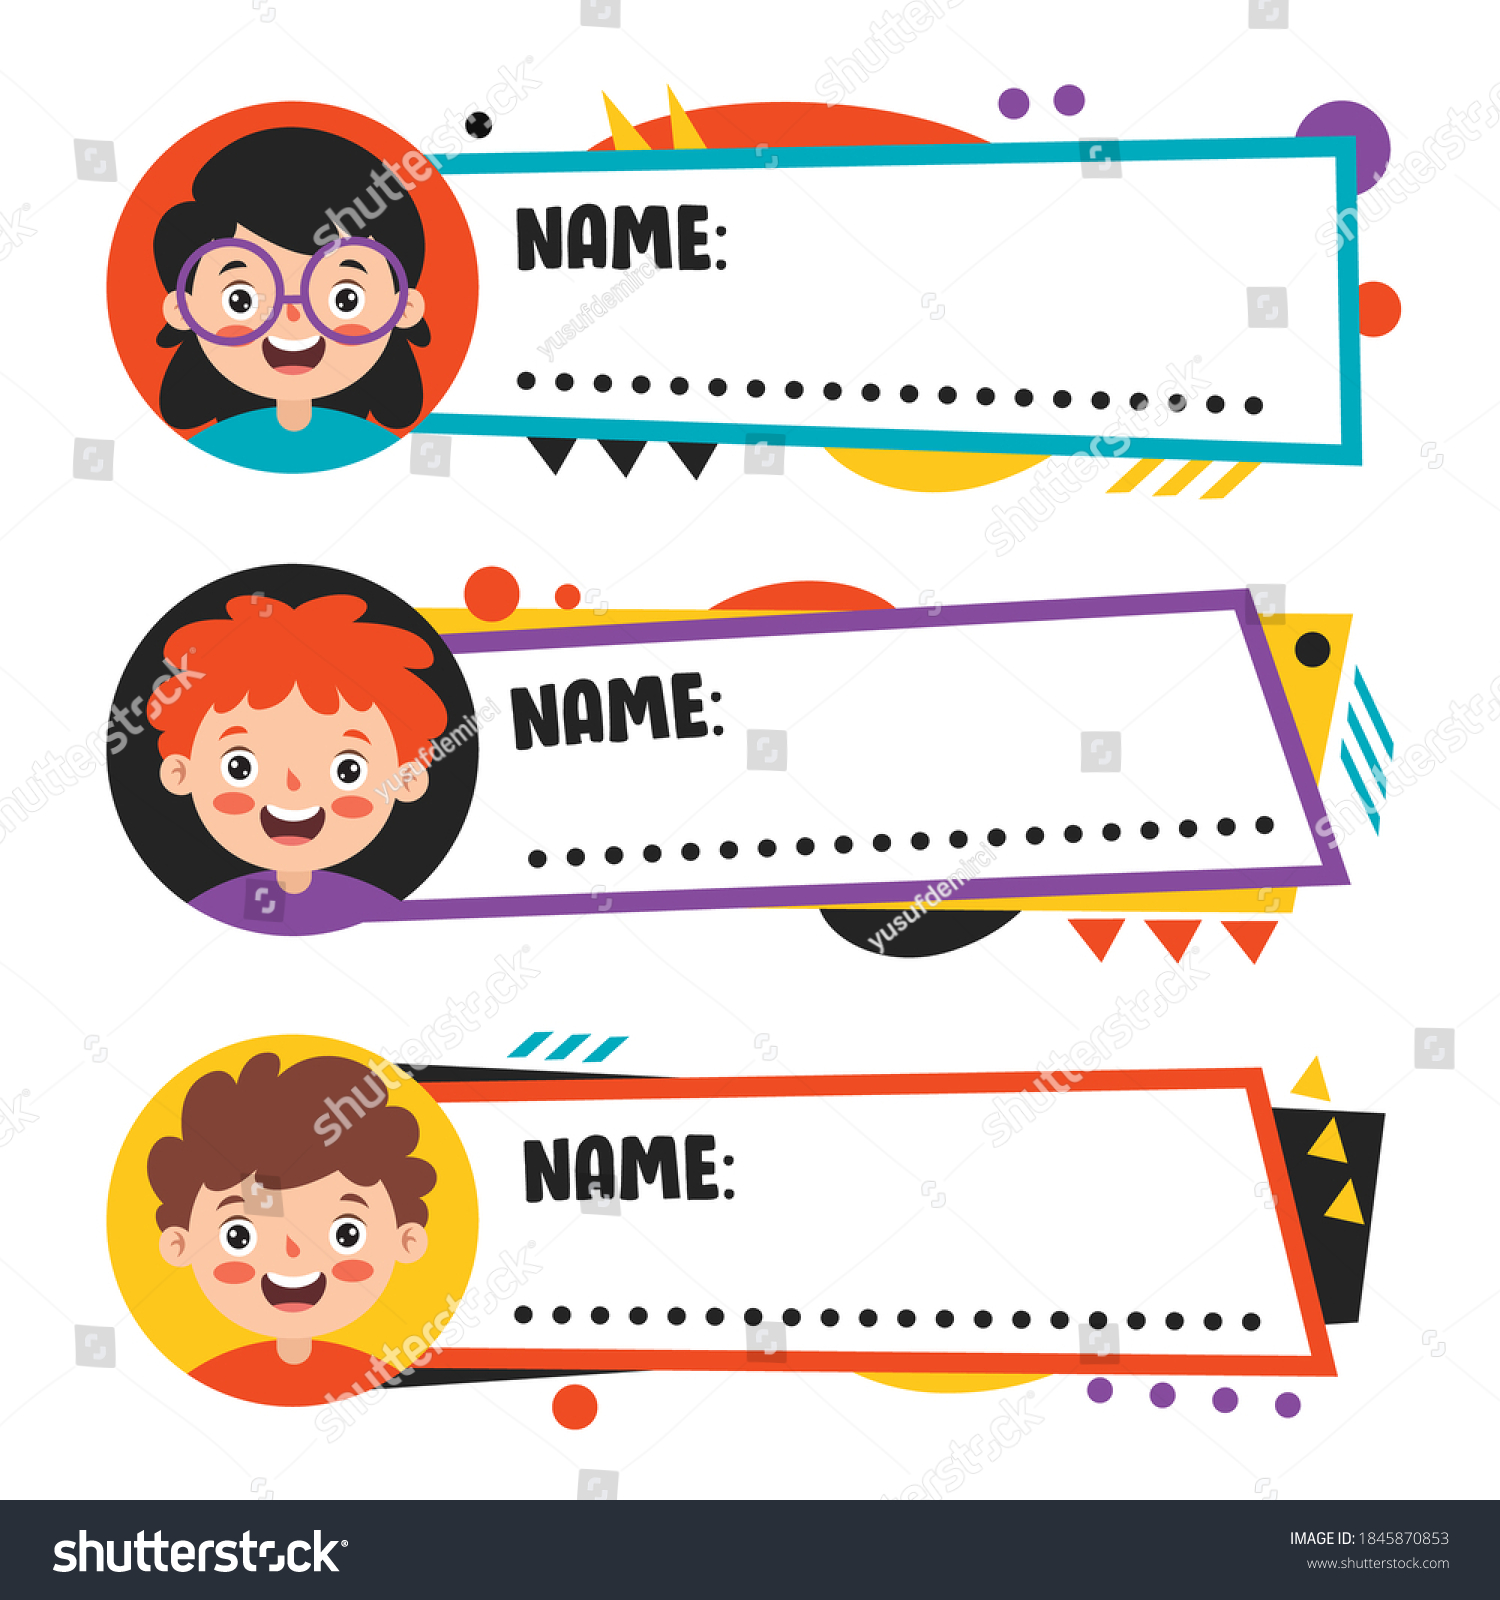 Name Tags For School Children #1845870853